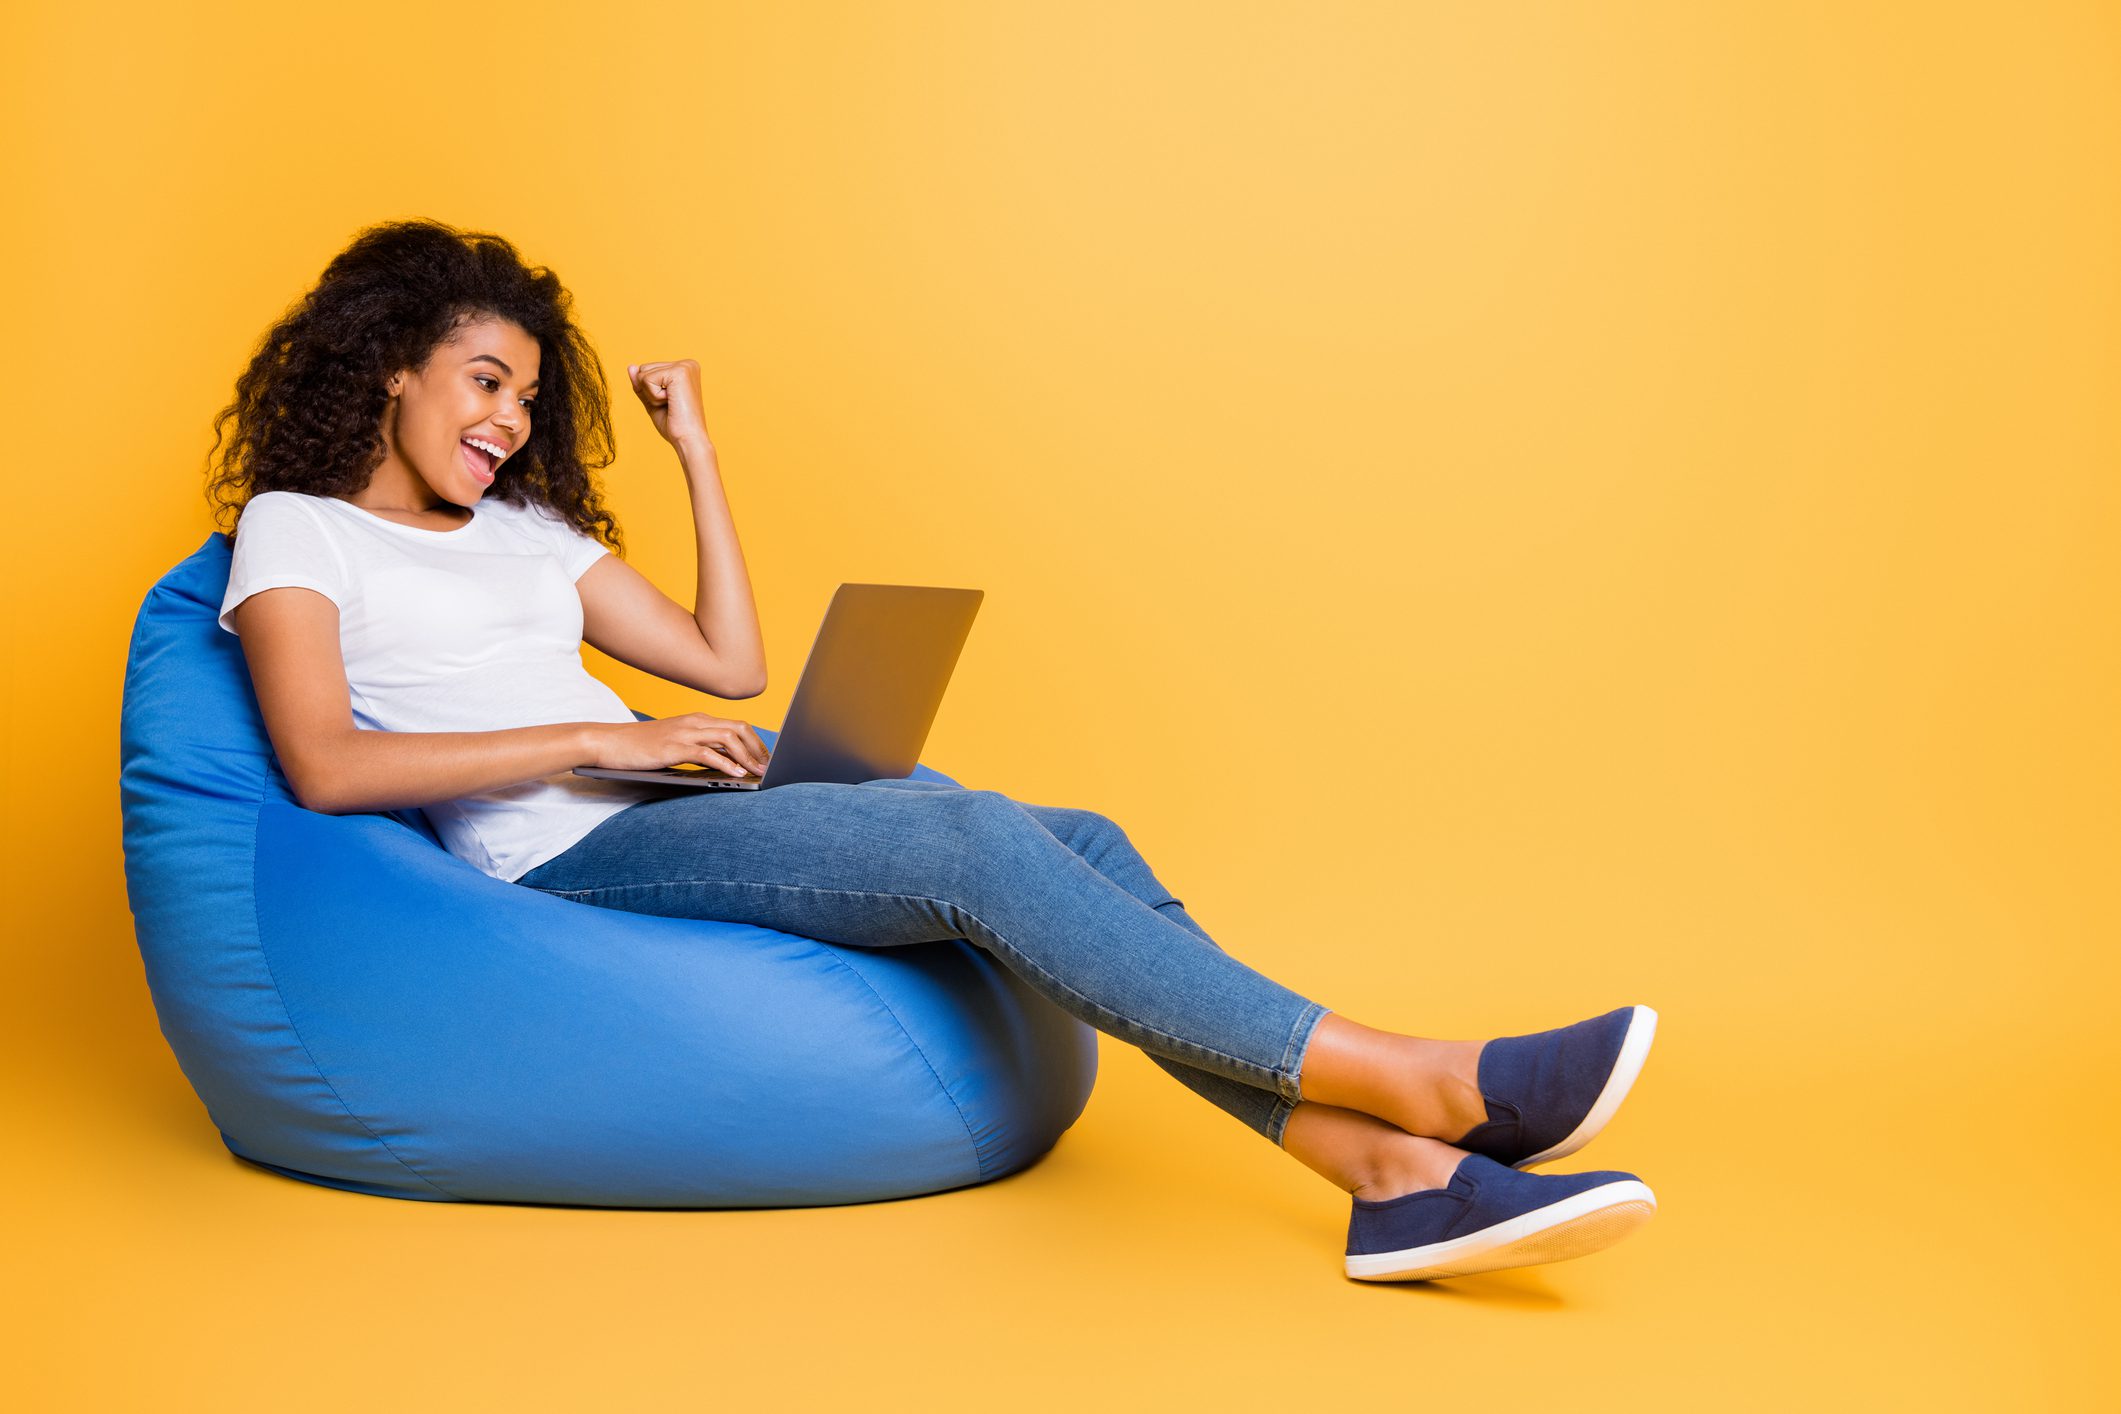 Portrait-of-nice-attractive-lovely-cheerful-cheery-glad-satisfied-wavy-haired-girl-sitting-in-bag-chair-using-laptop-celebrating-isolated-over-bright-vivid-shine-vibrant-yellow-color-background